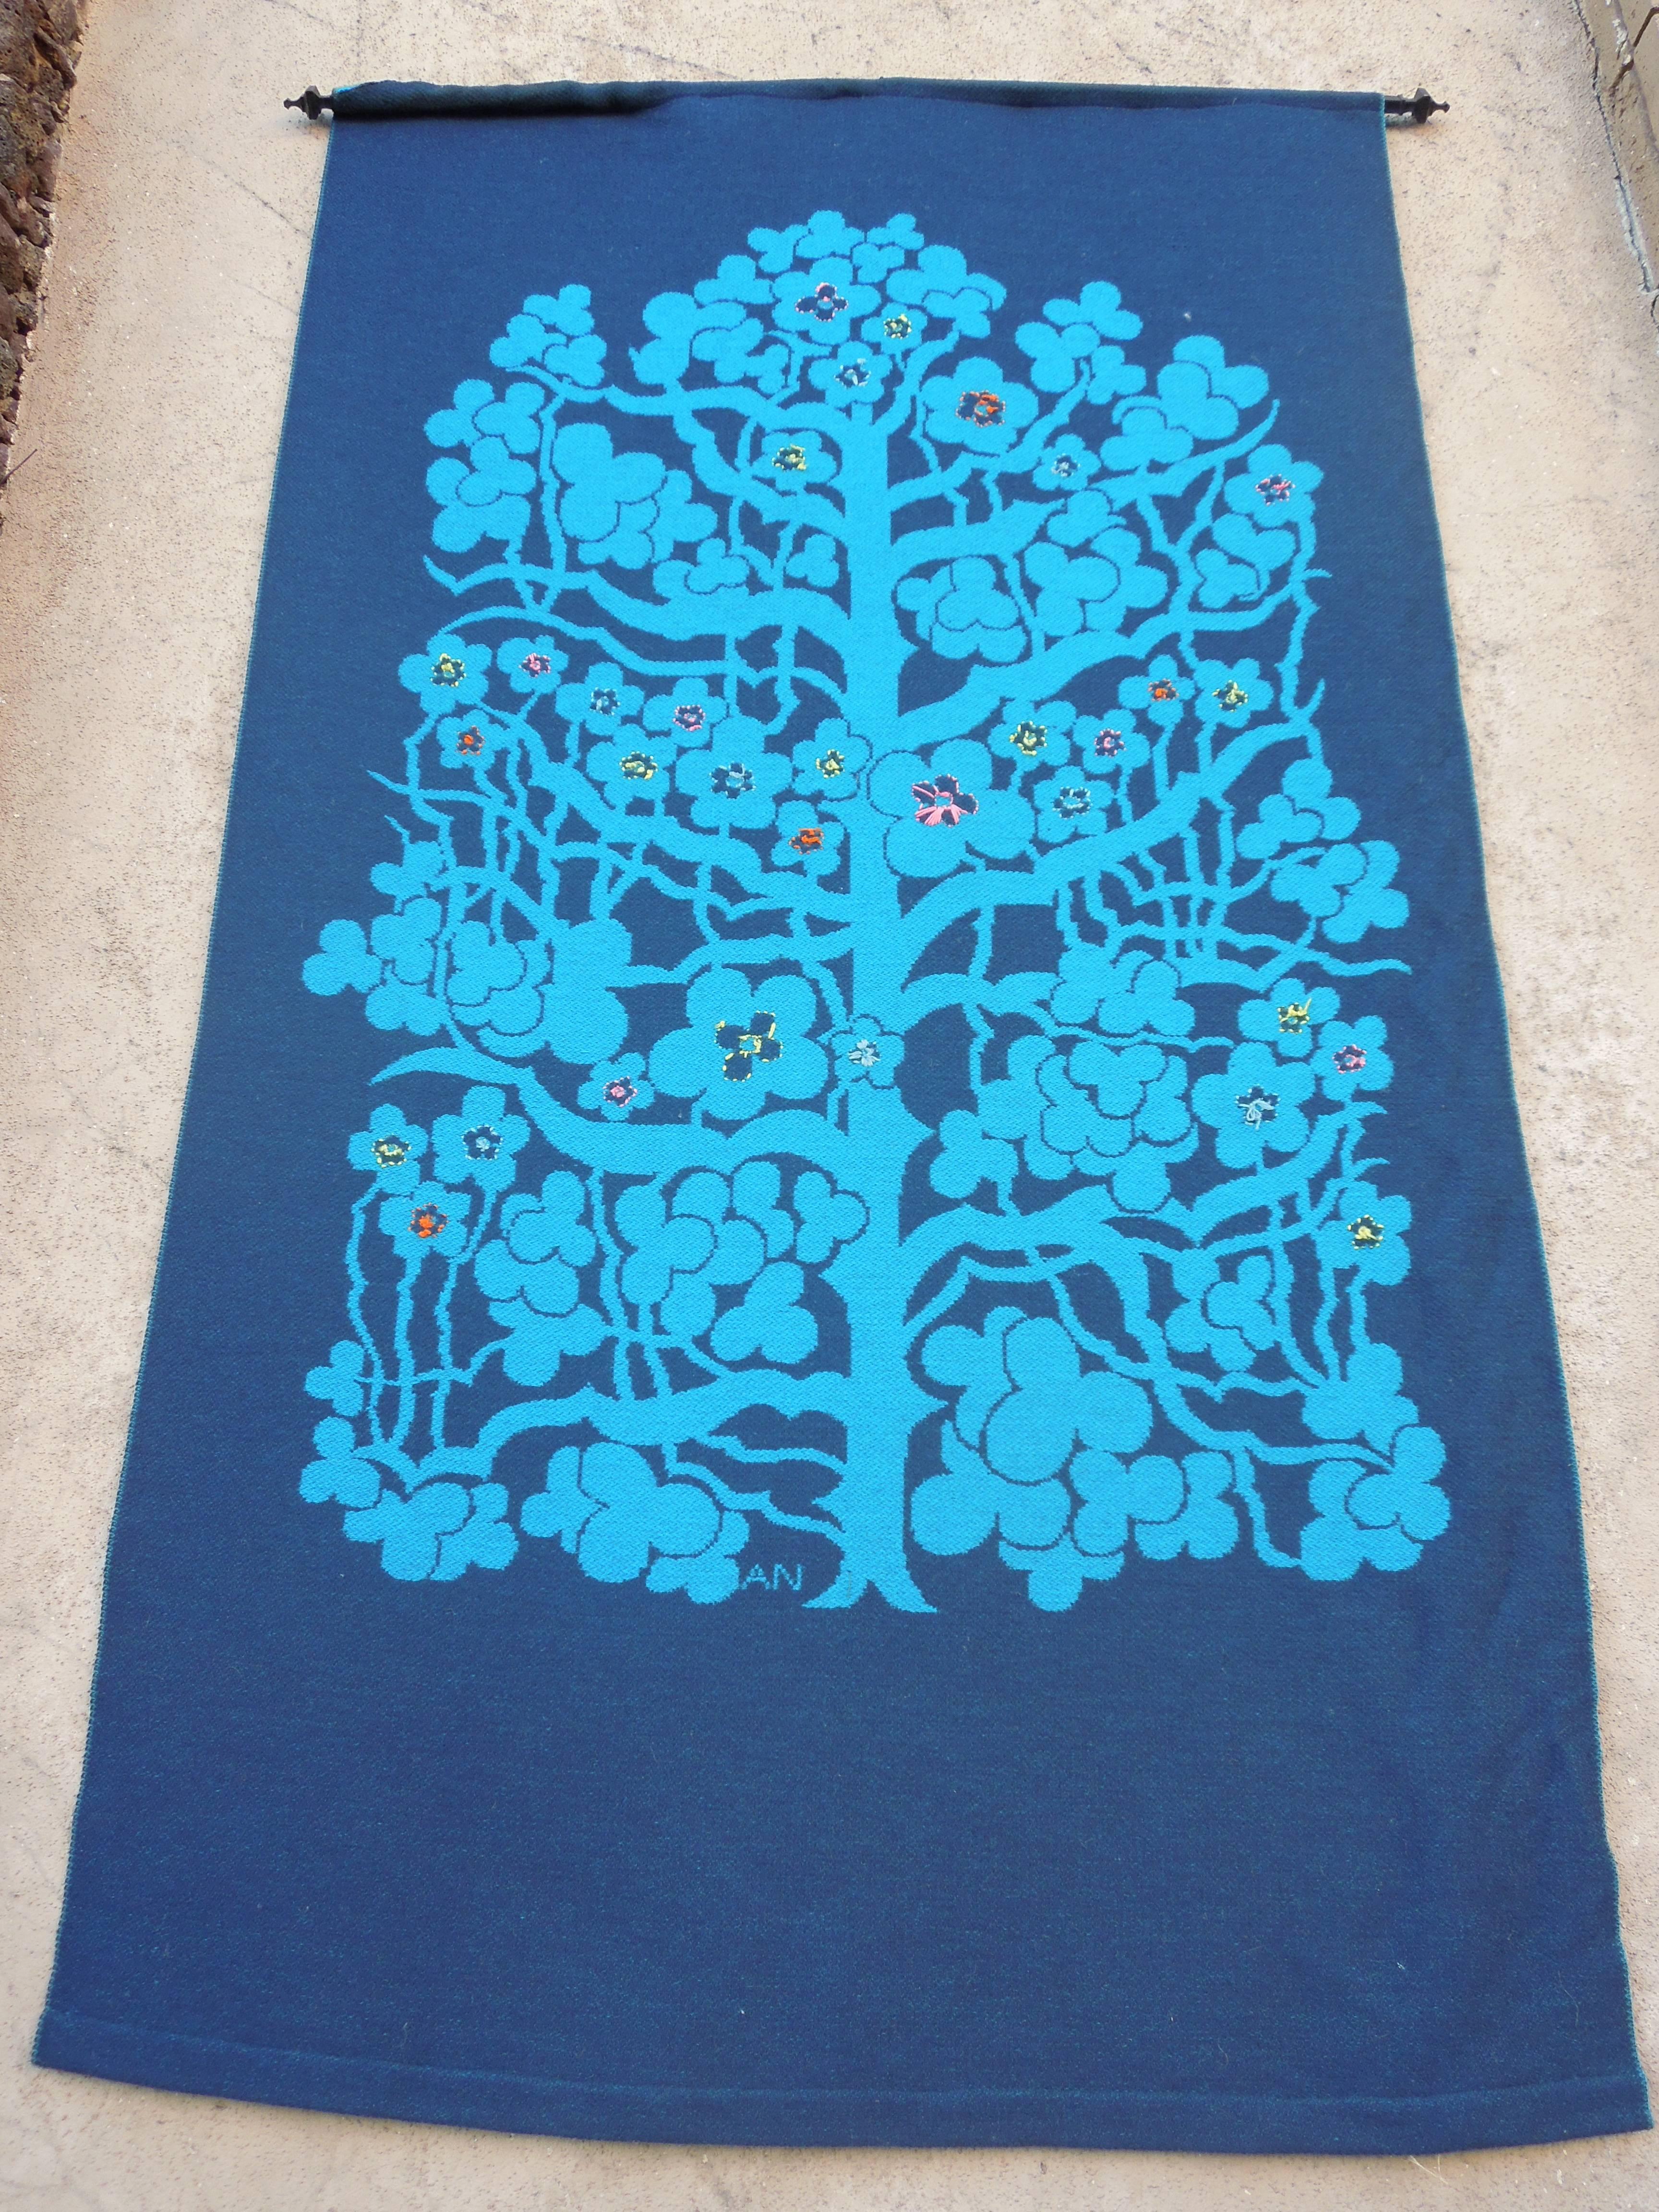 This large beautifully handmade blue colored wool tapestry is from a very upscale Palm Springs estate. The tapestry is signed AN. The tapestry is double sided, and was hung on the reverse lighter side, instead of the true face which is the navy